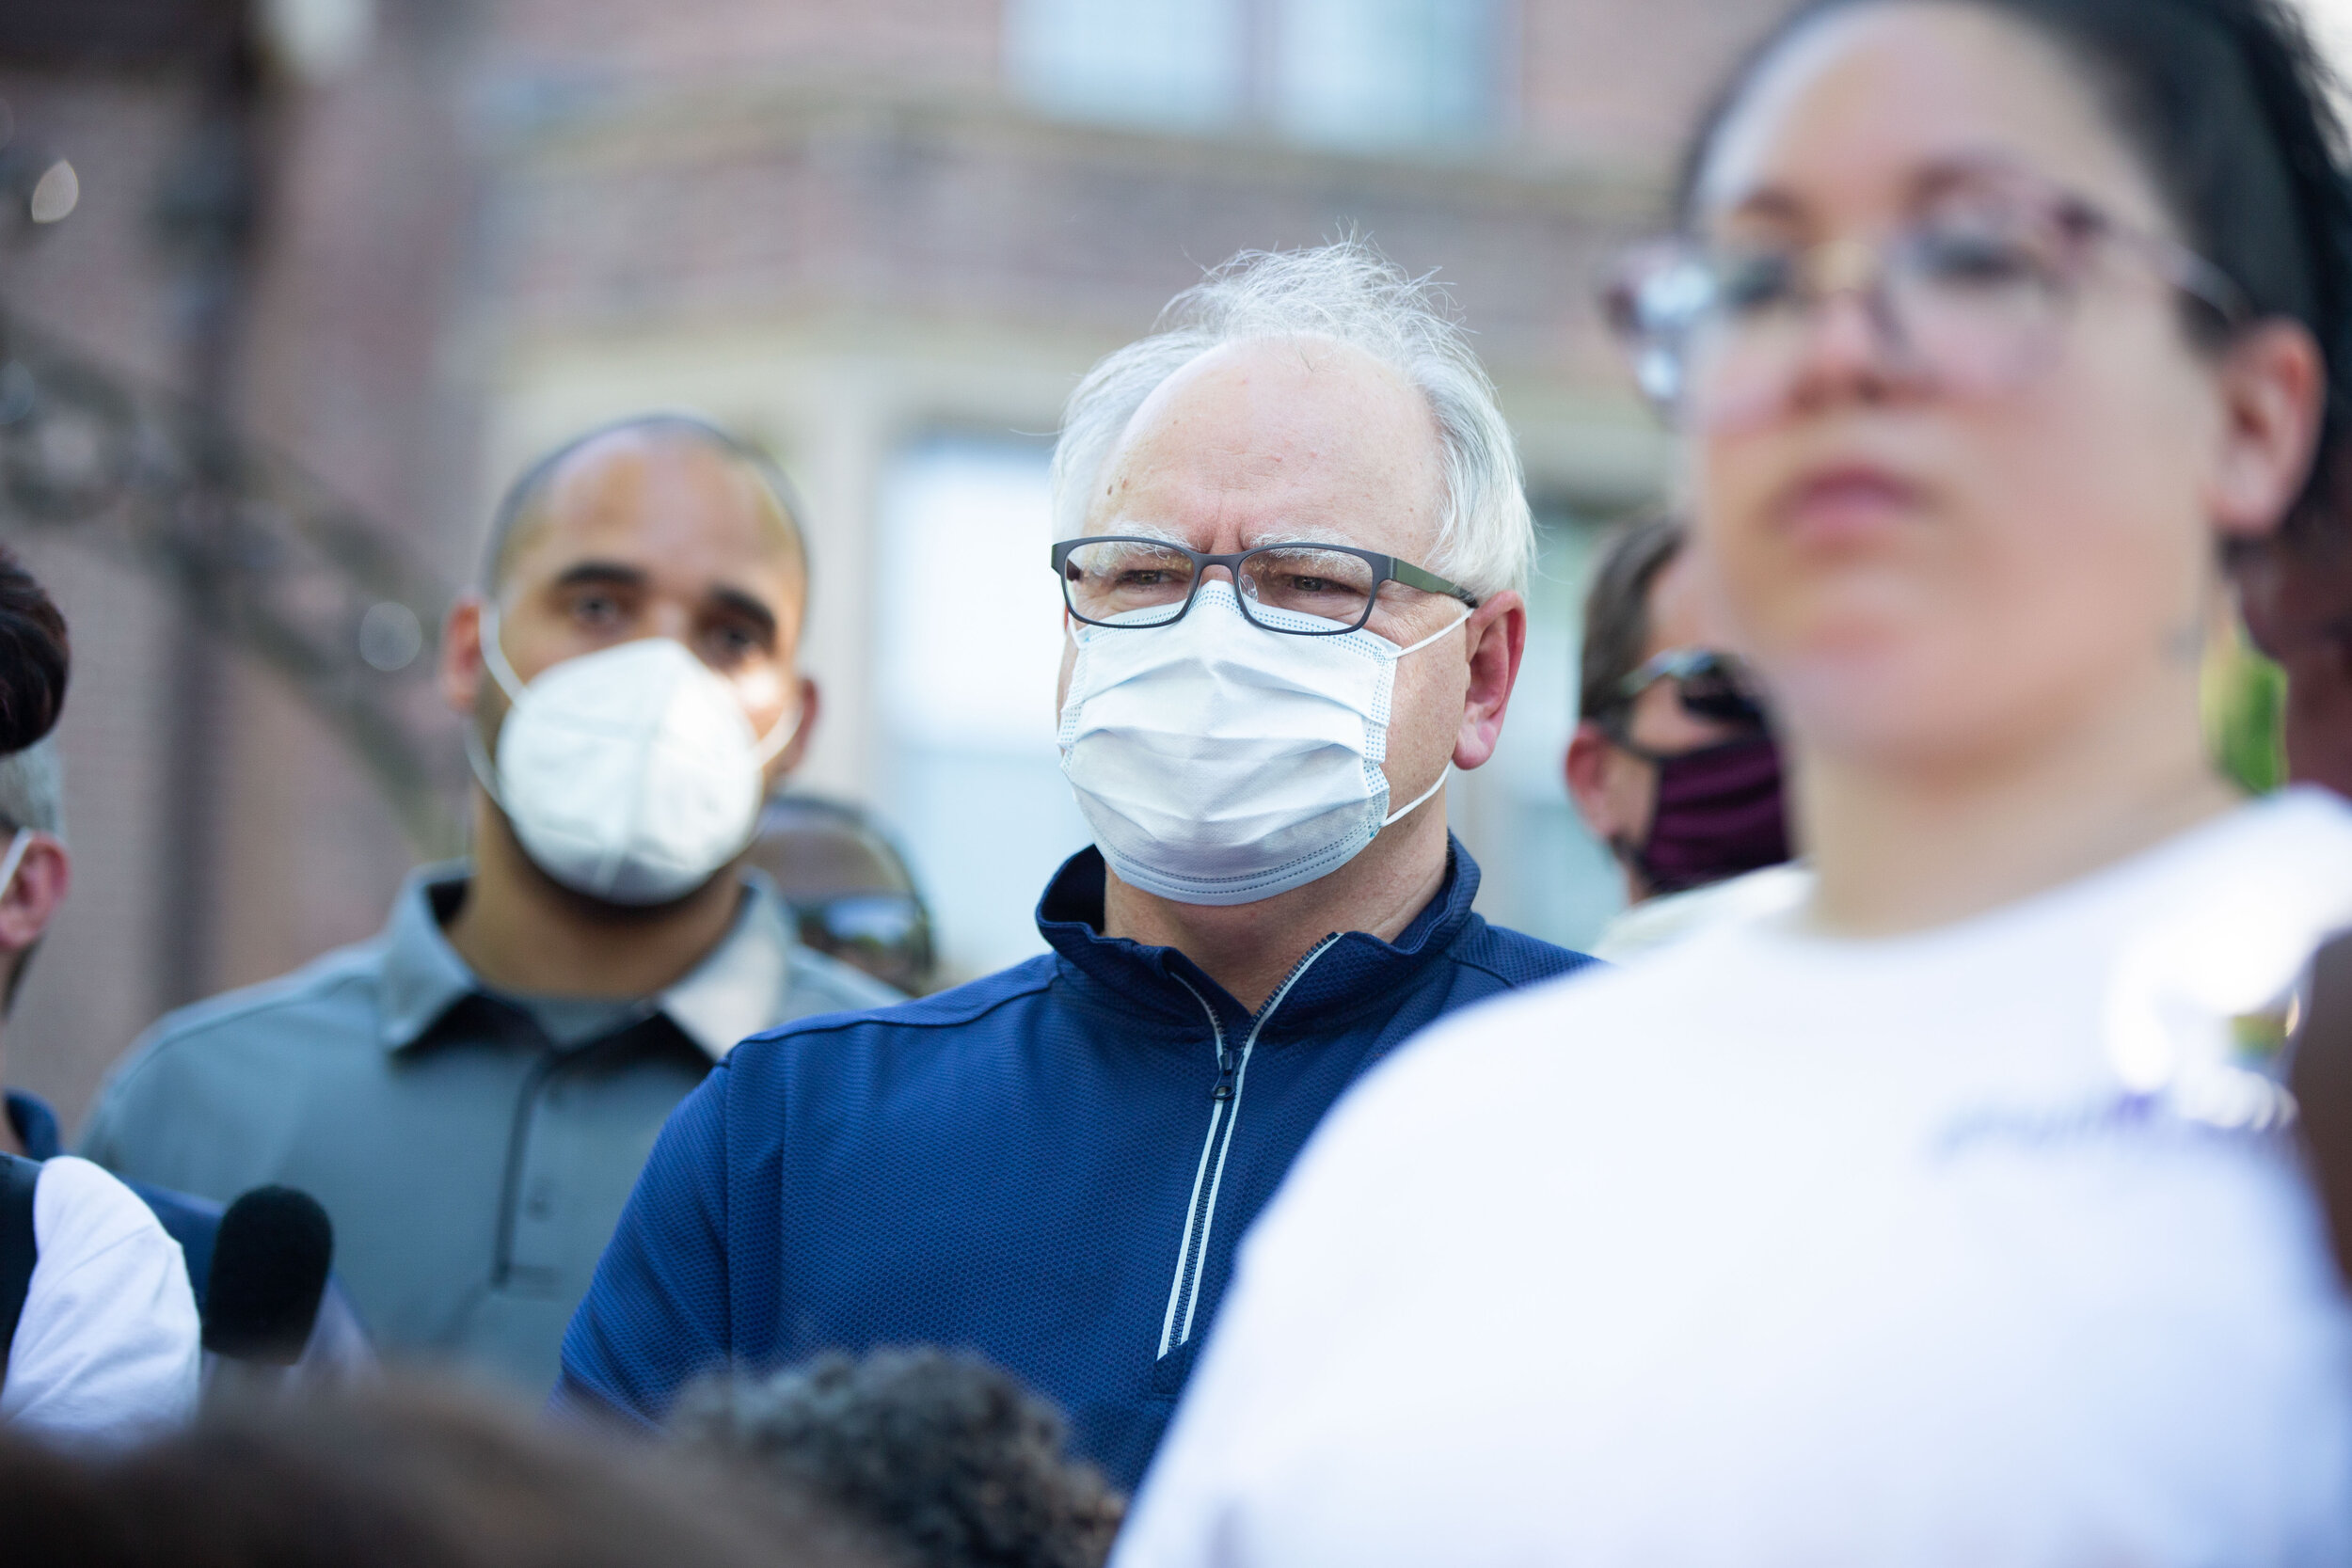  Governor Tim Walz stands behind the people that were speaking at a protest over the police killing of George Floyd in front of the Governors Mansion in Saint Paul, Minnesota on June 1, 2020. Chris Juhn/Zenger 